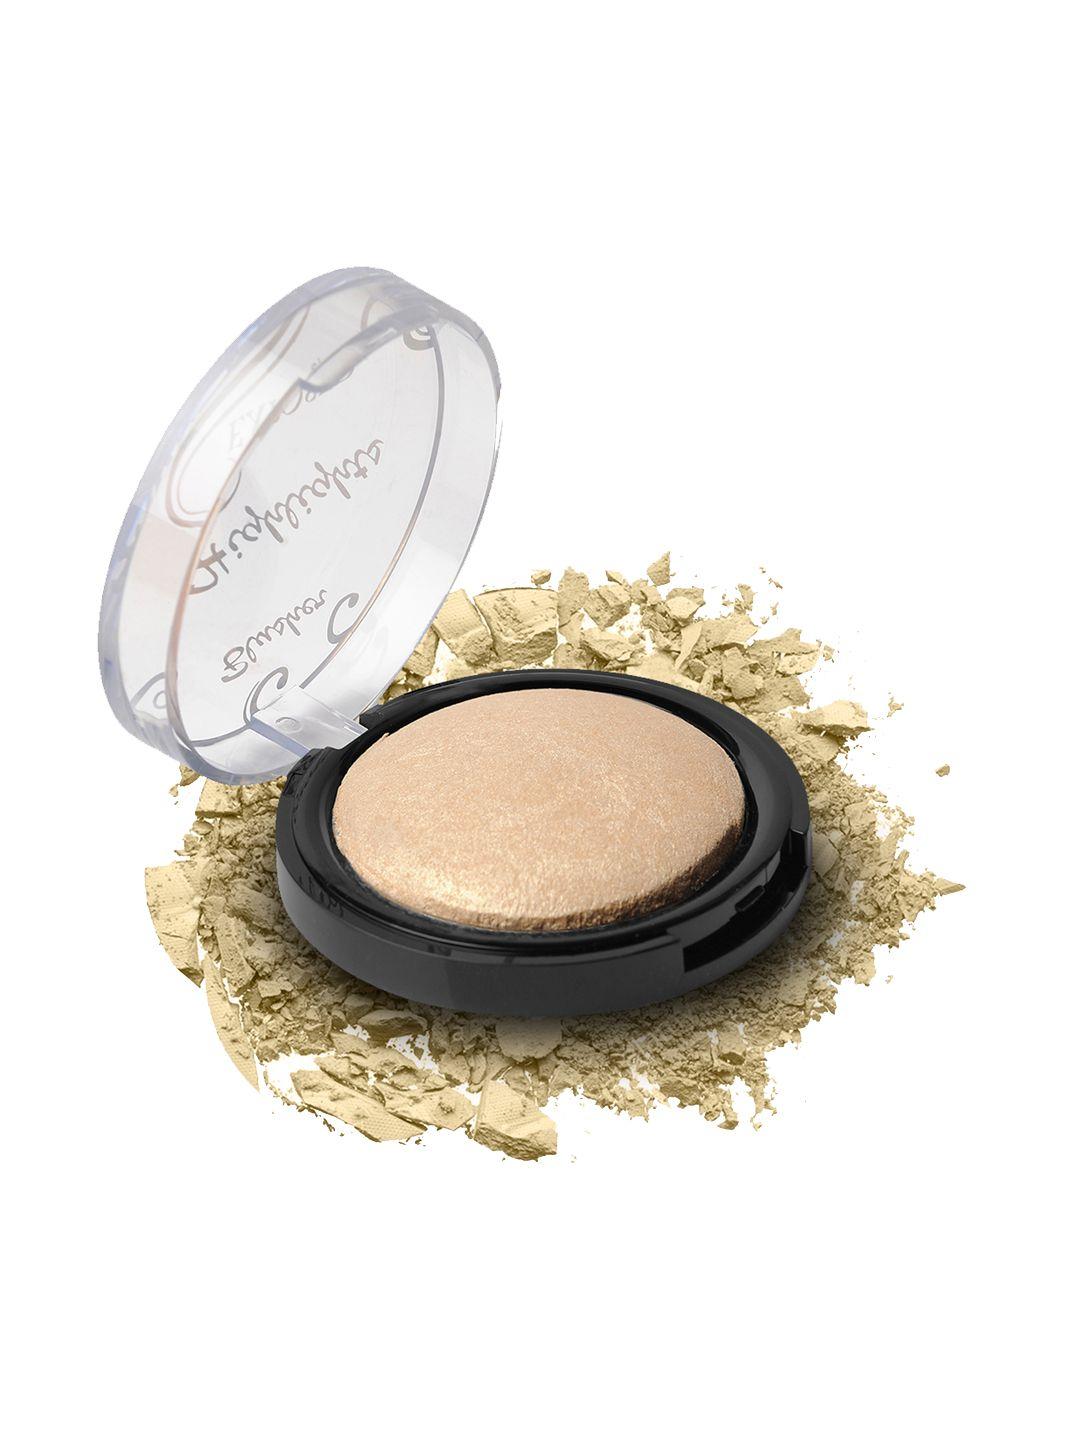 incolor exposed highlighter & blush - bronze glow 07